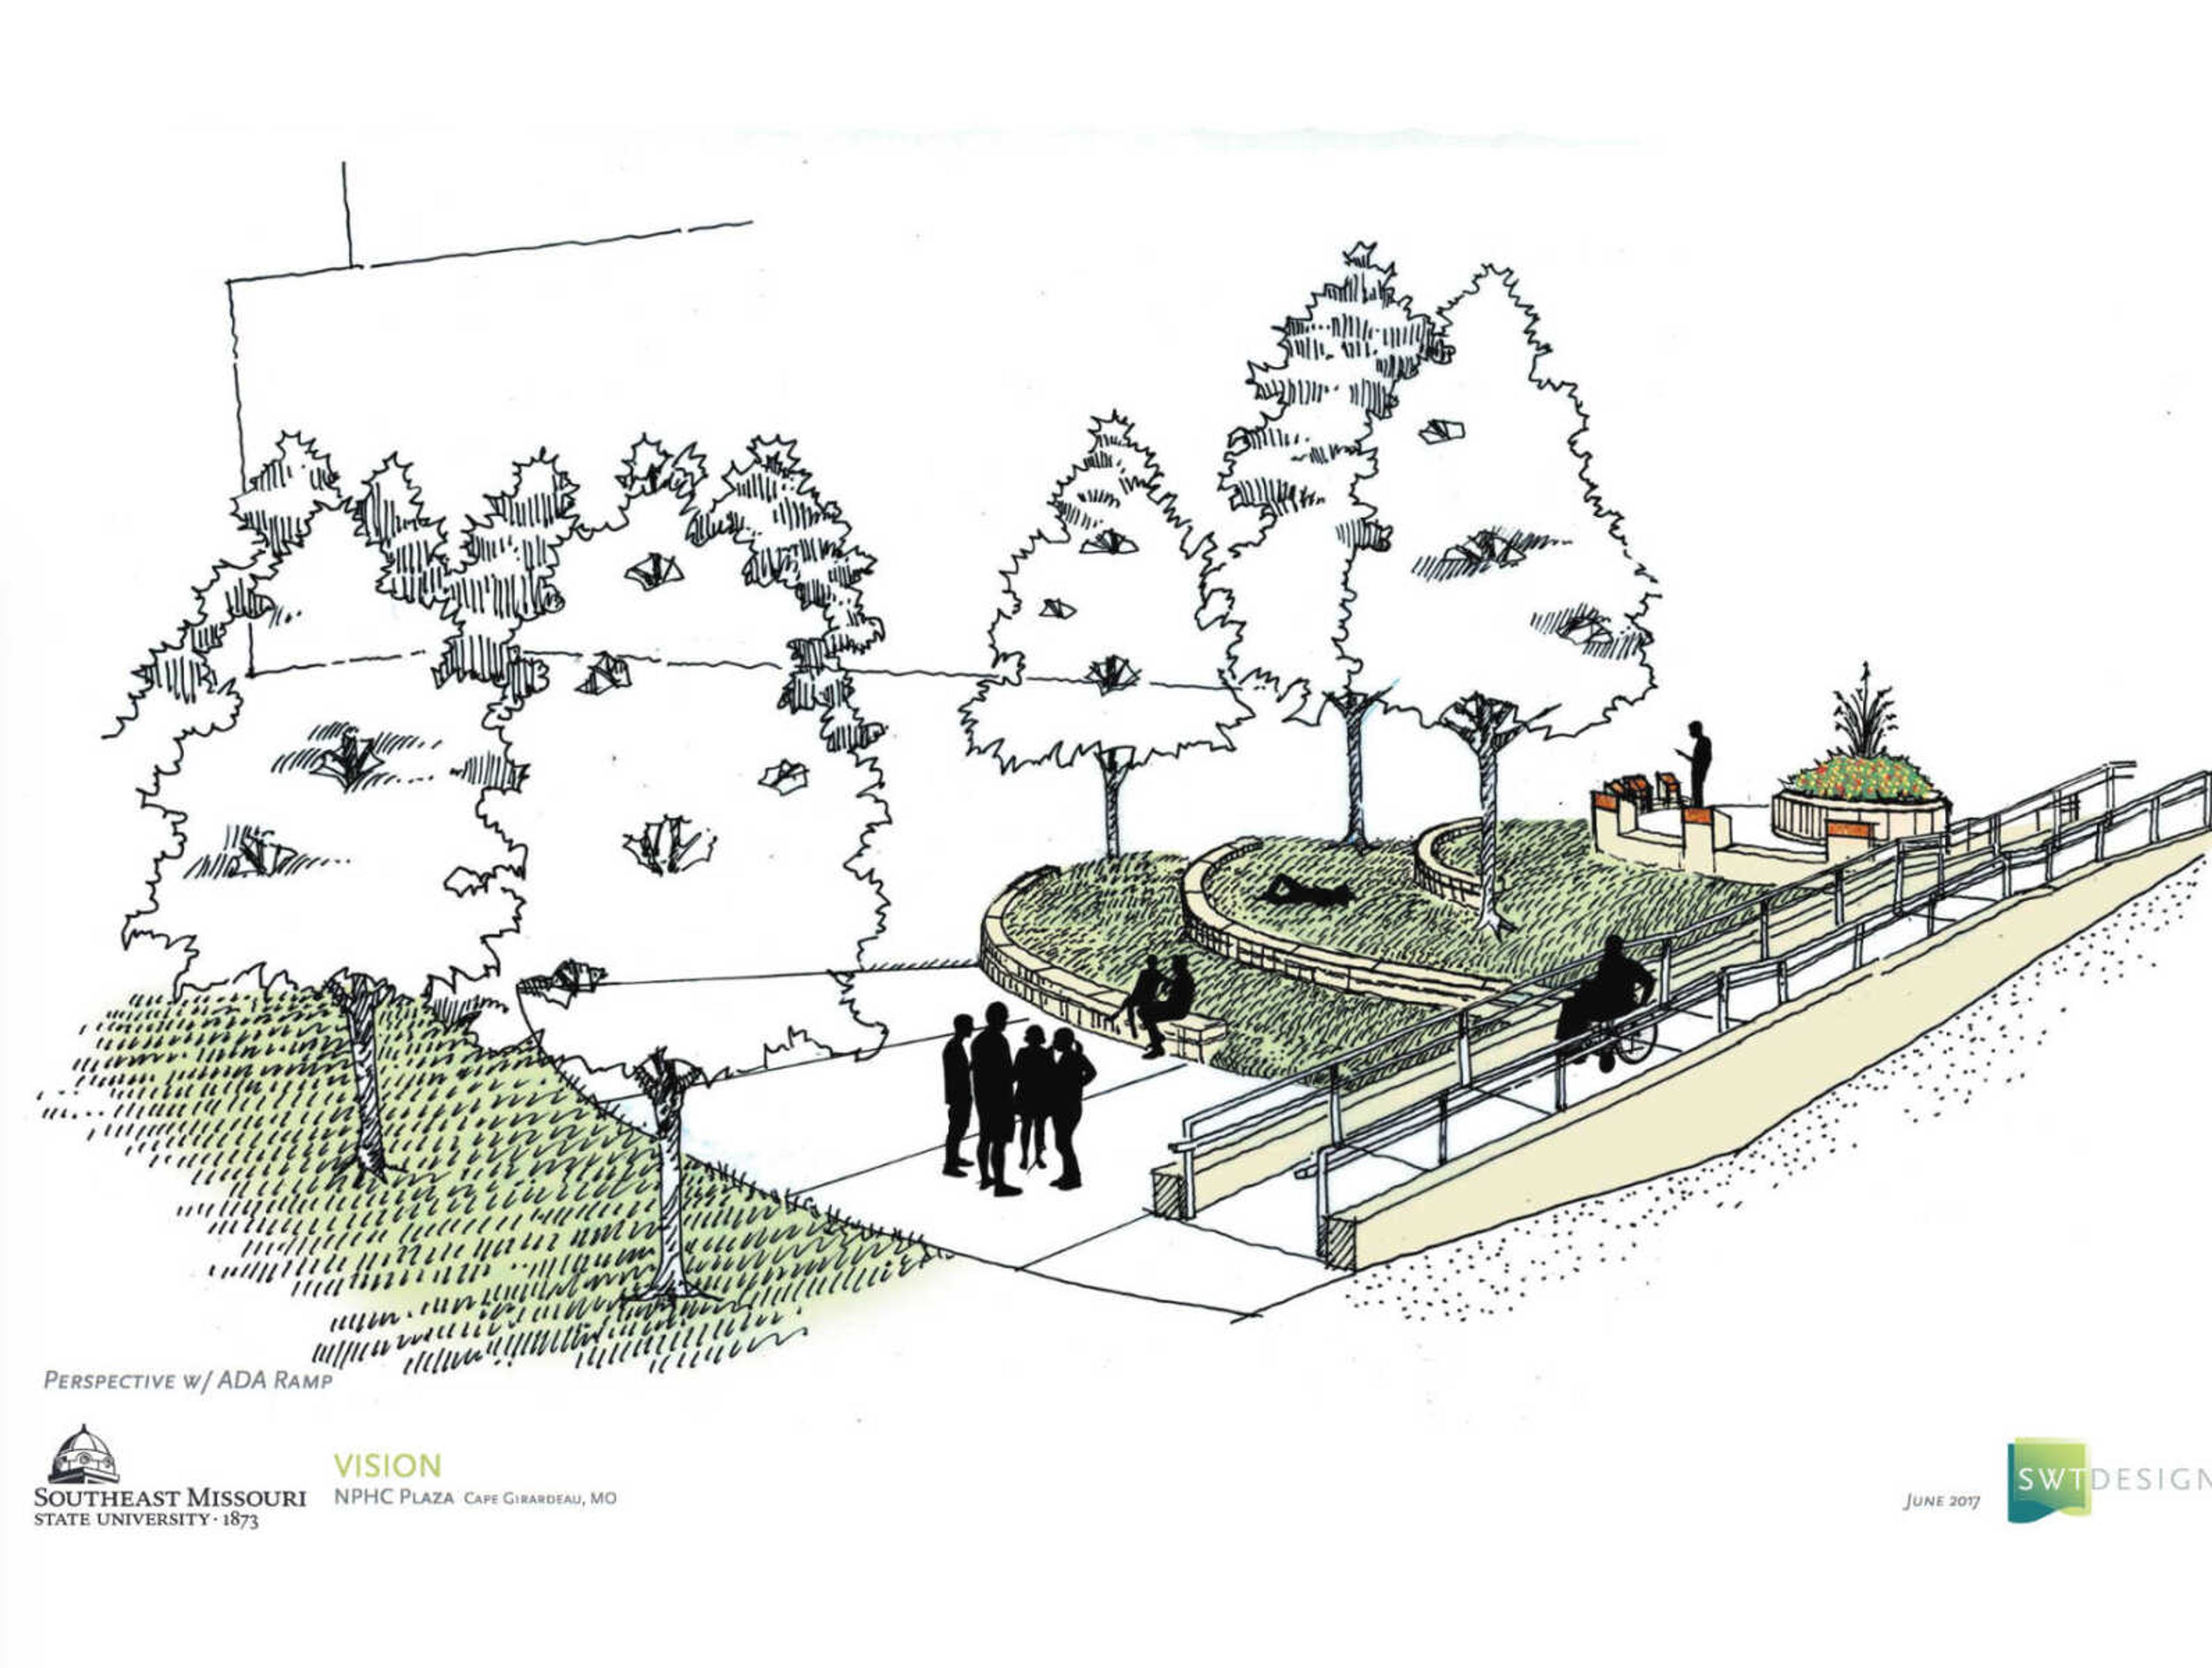 An illustration of what the NPHC Plaza will look like once completed during the summer.